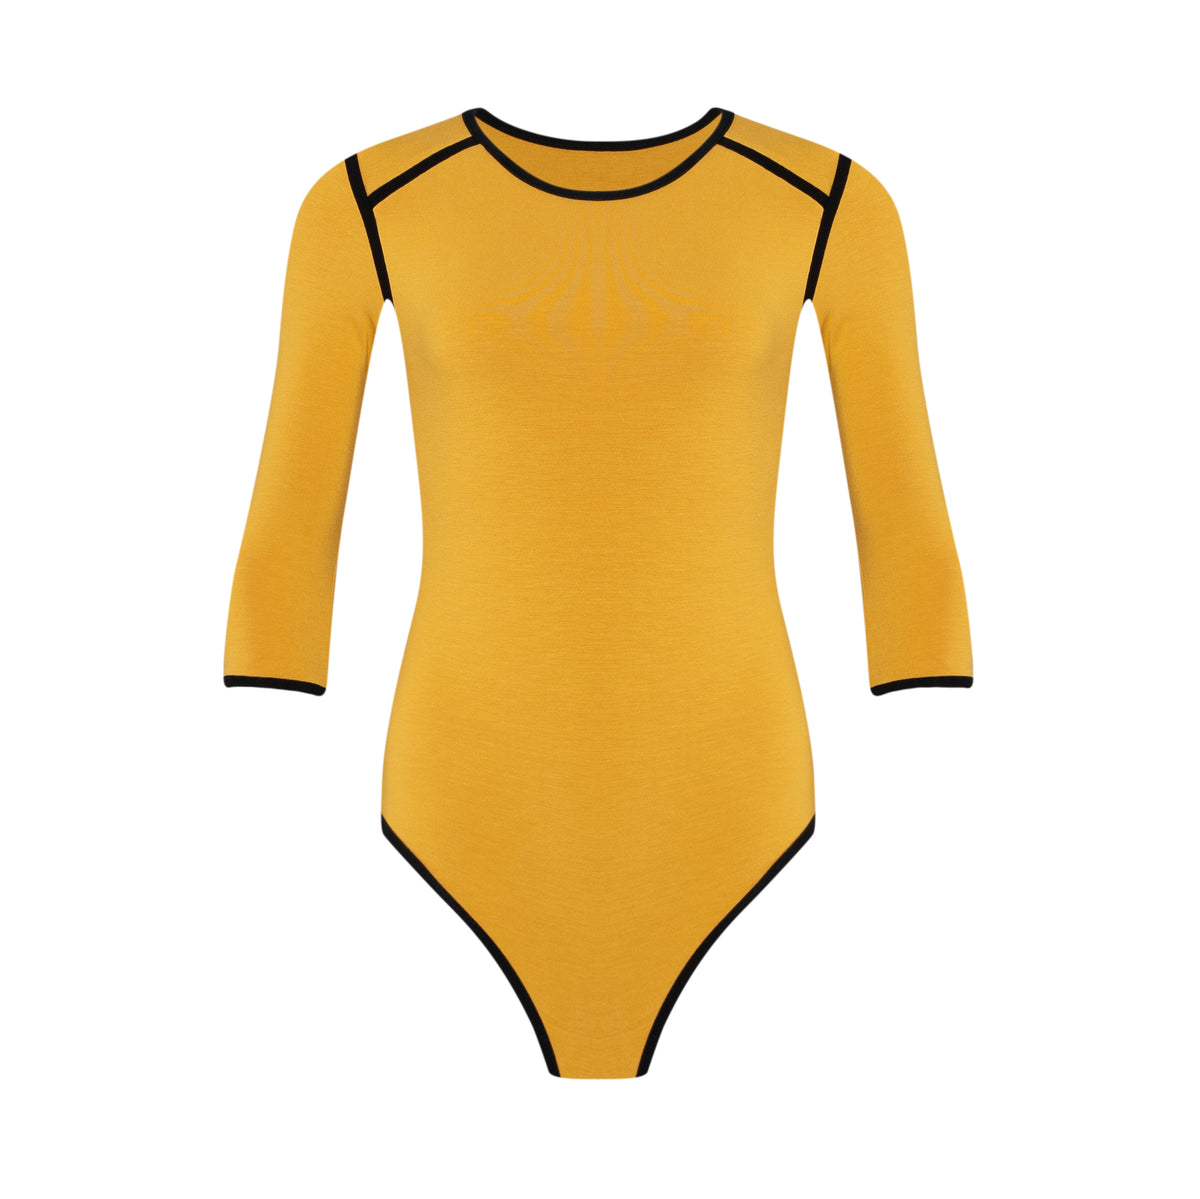 Girl Two-tone Sustainable Lenzing Viscose Bodysuit in canary yellow